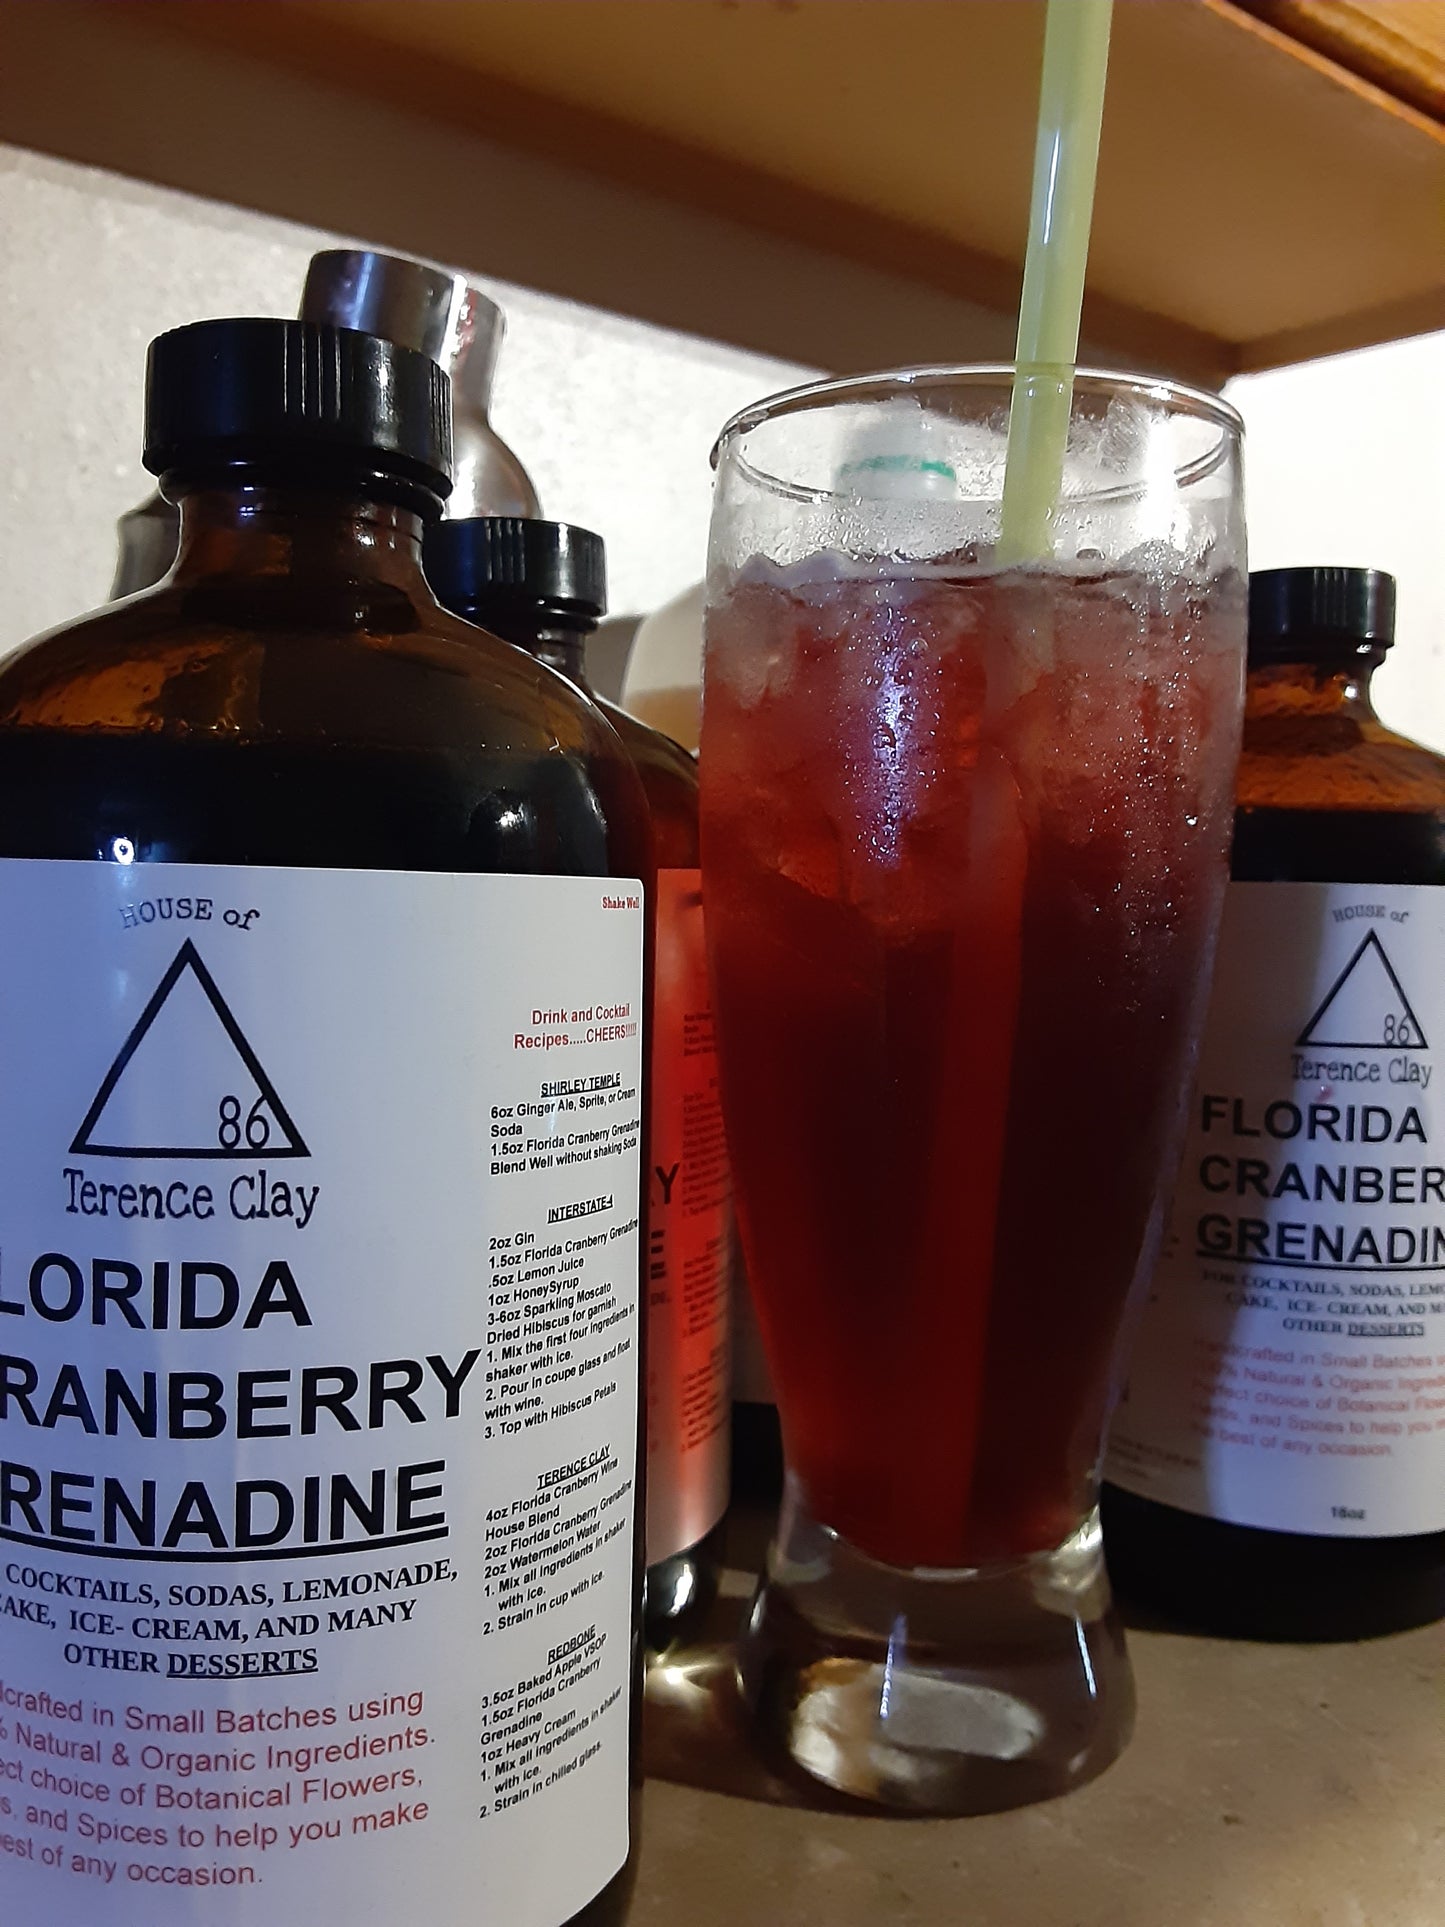 HOUSE of Terence Clay "FLORIDA CRANBERRY GRENADINE"